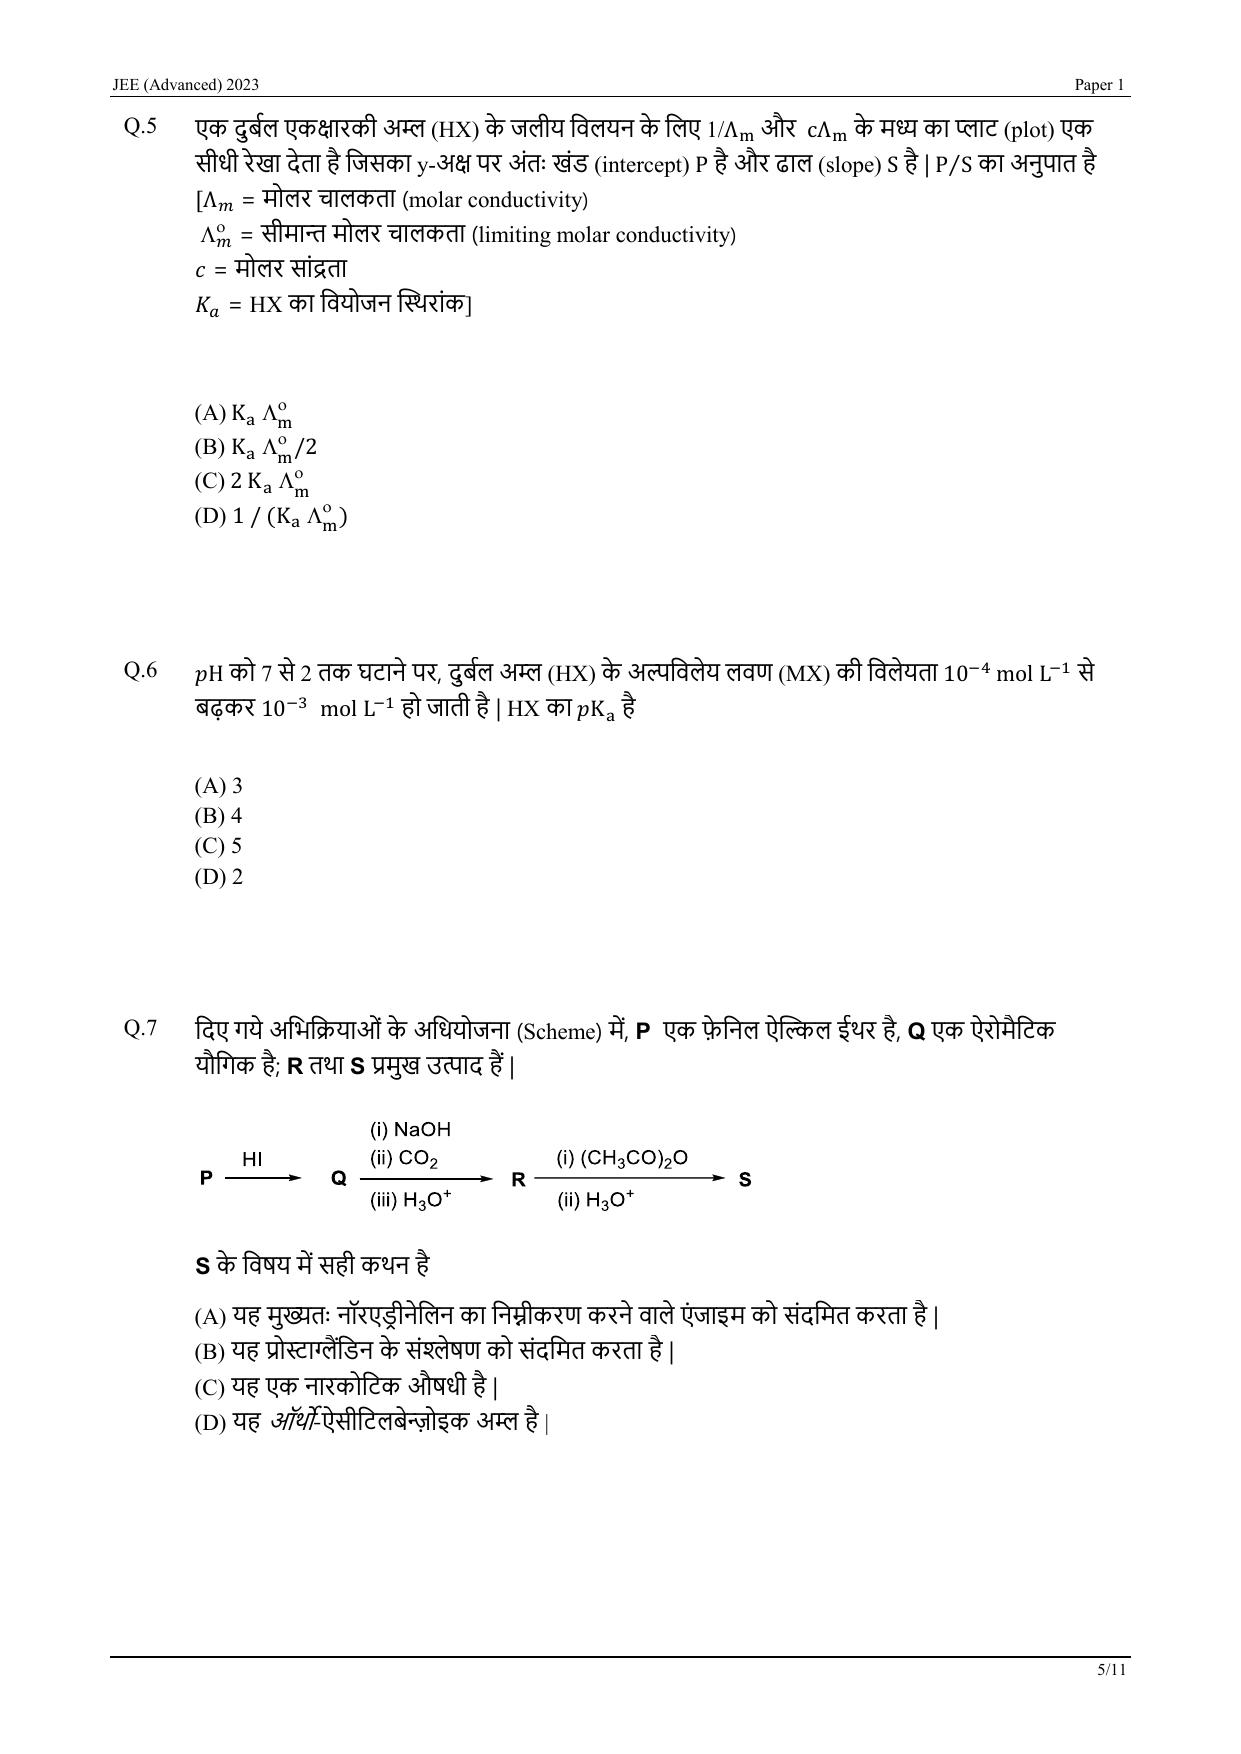 JEE Advanced 2023 Question Paper 1 (Hindi) - Page 25